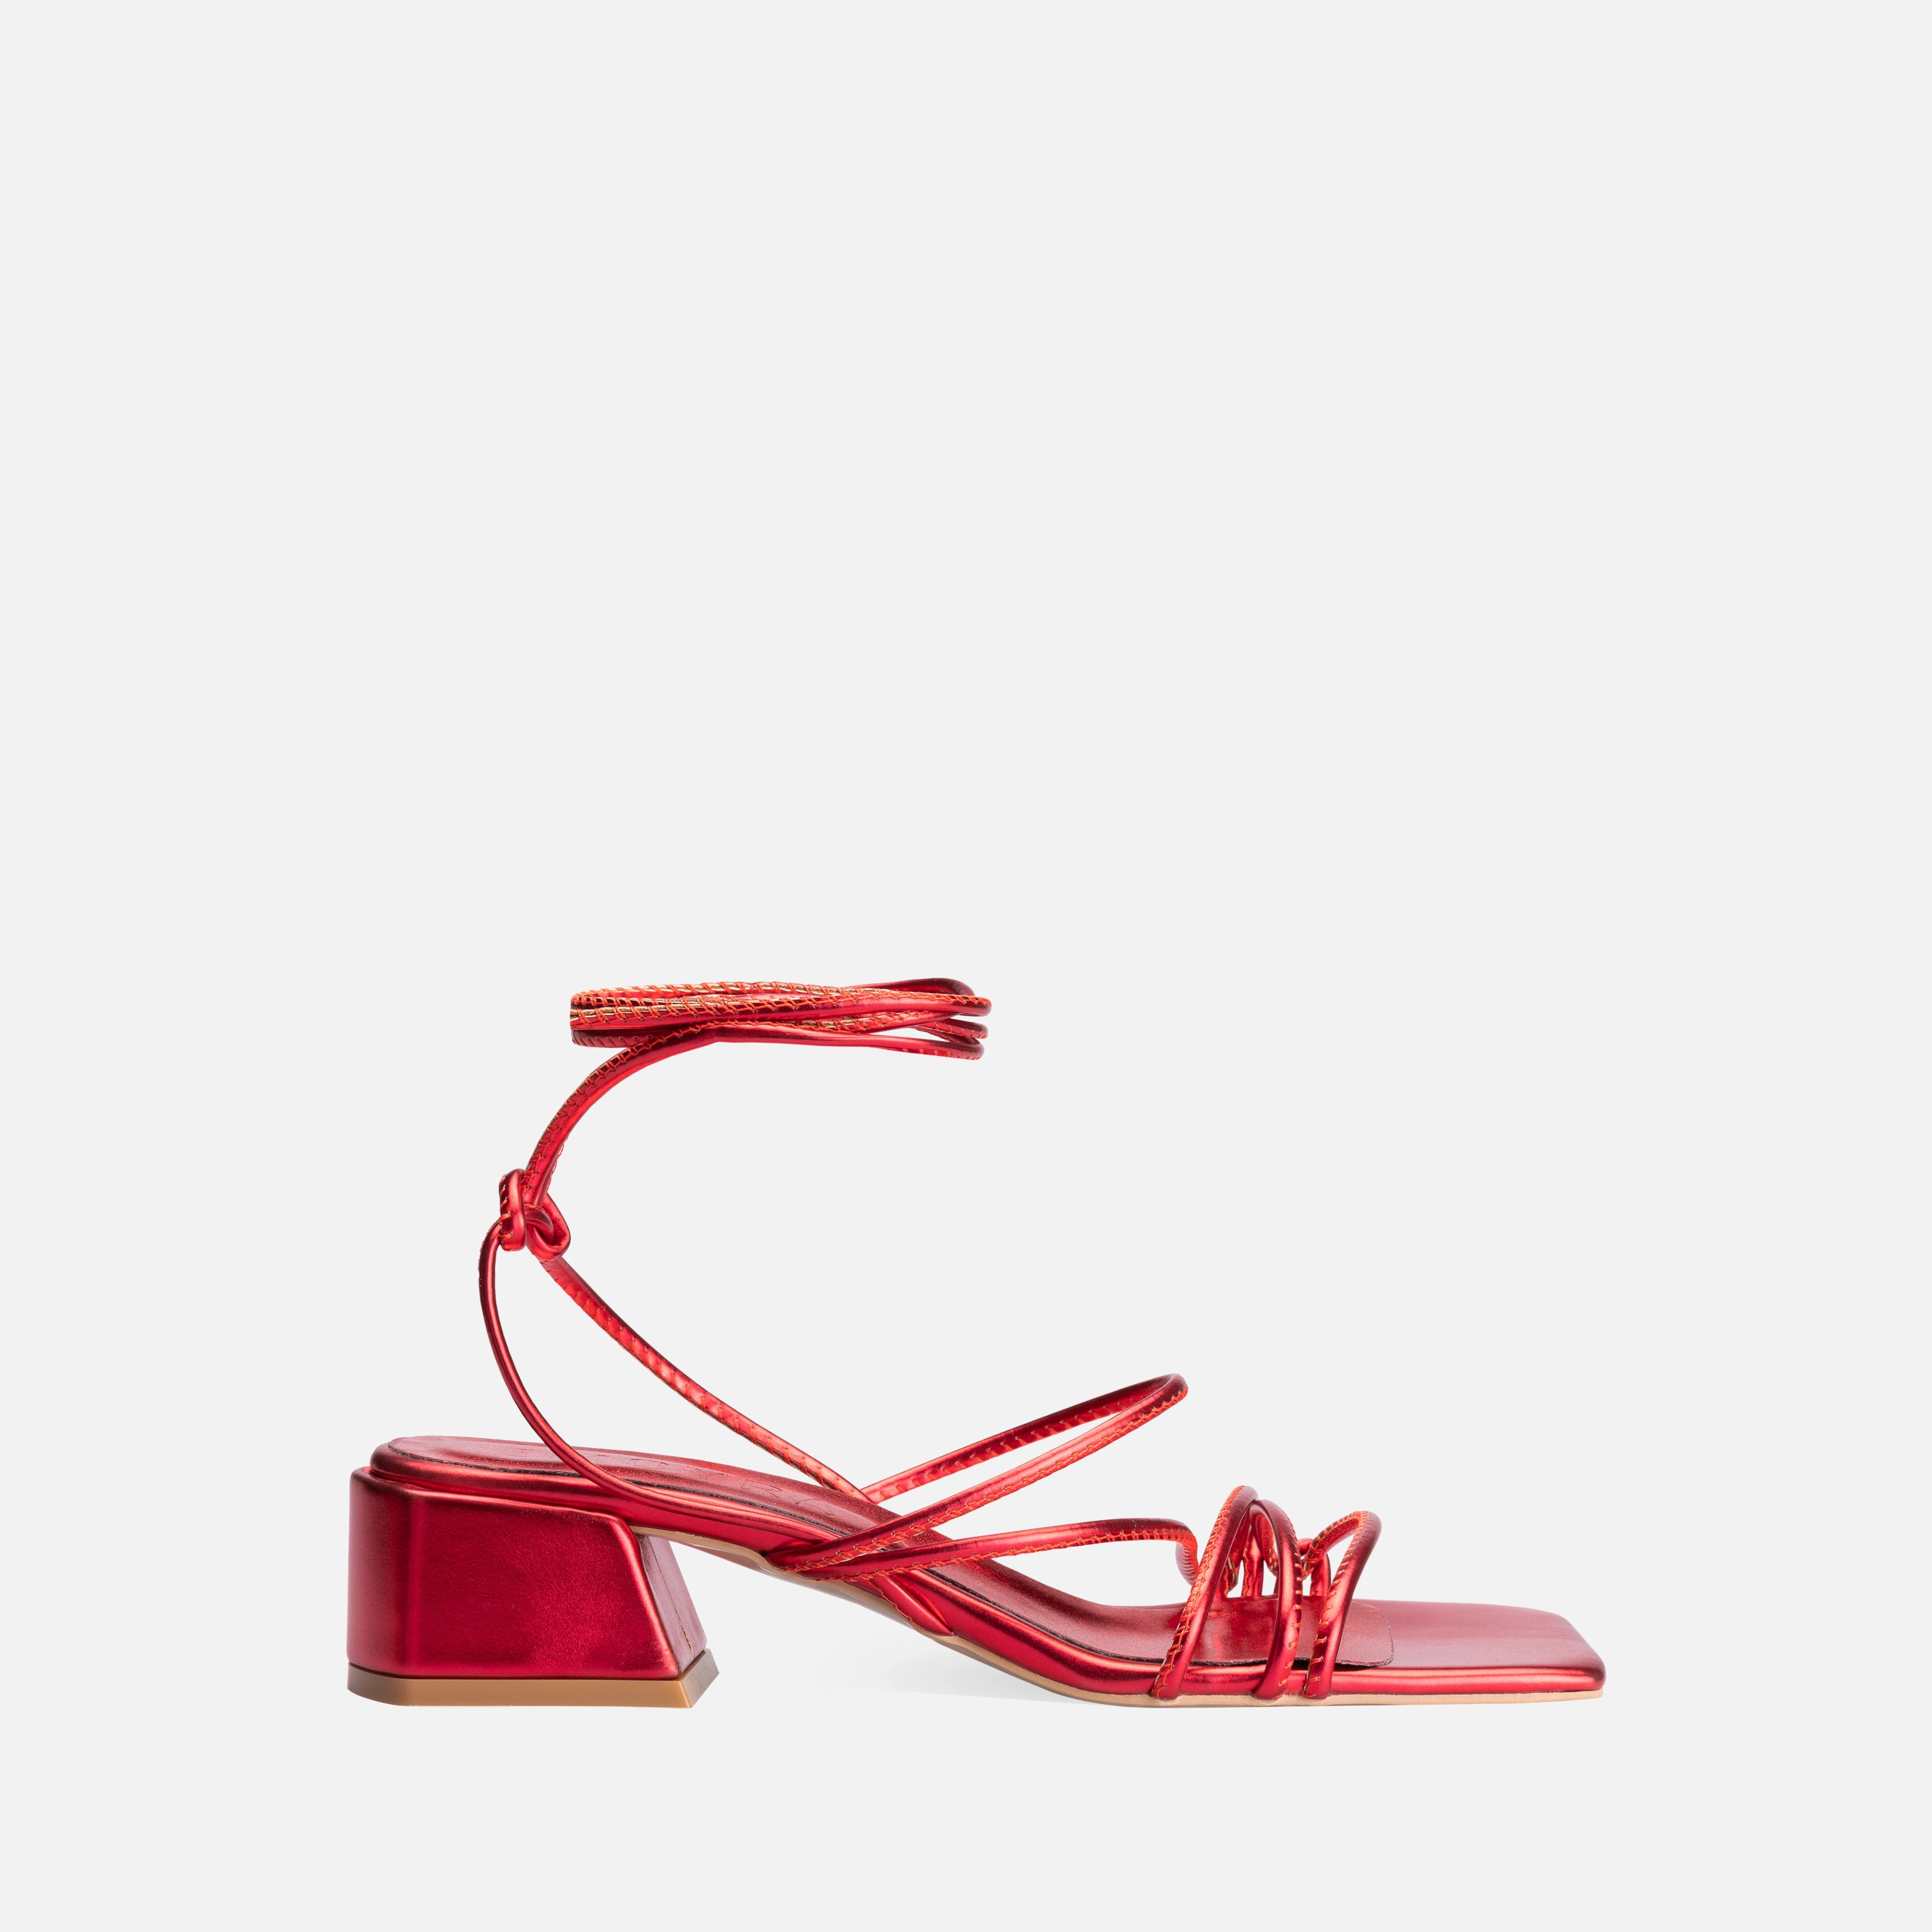 Metallic Lace-up Thick Short Heel Sandals - Red